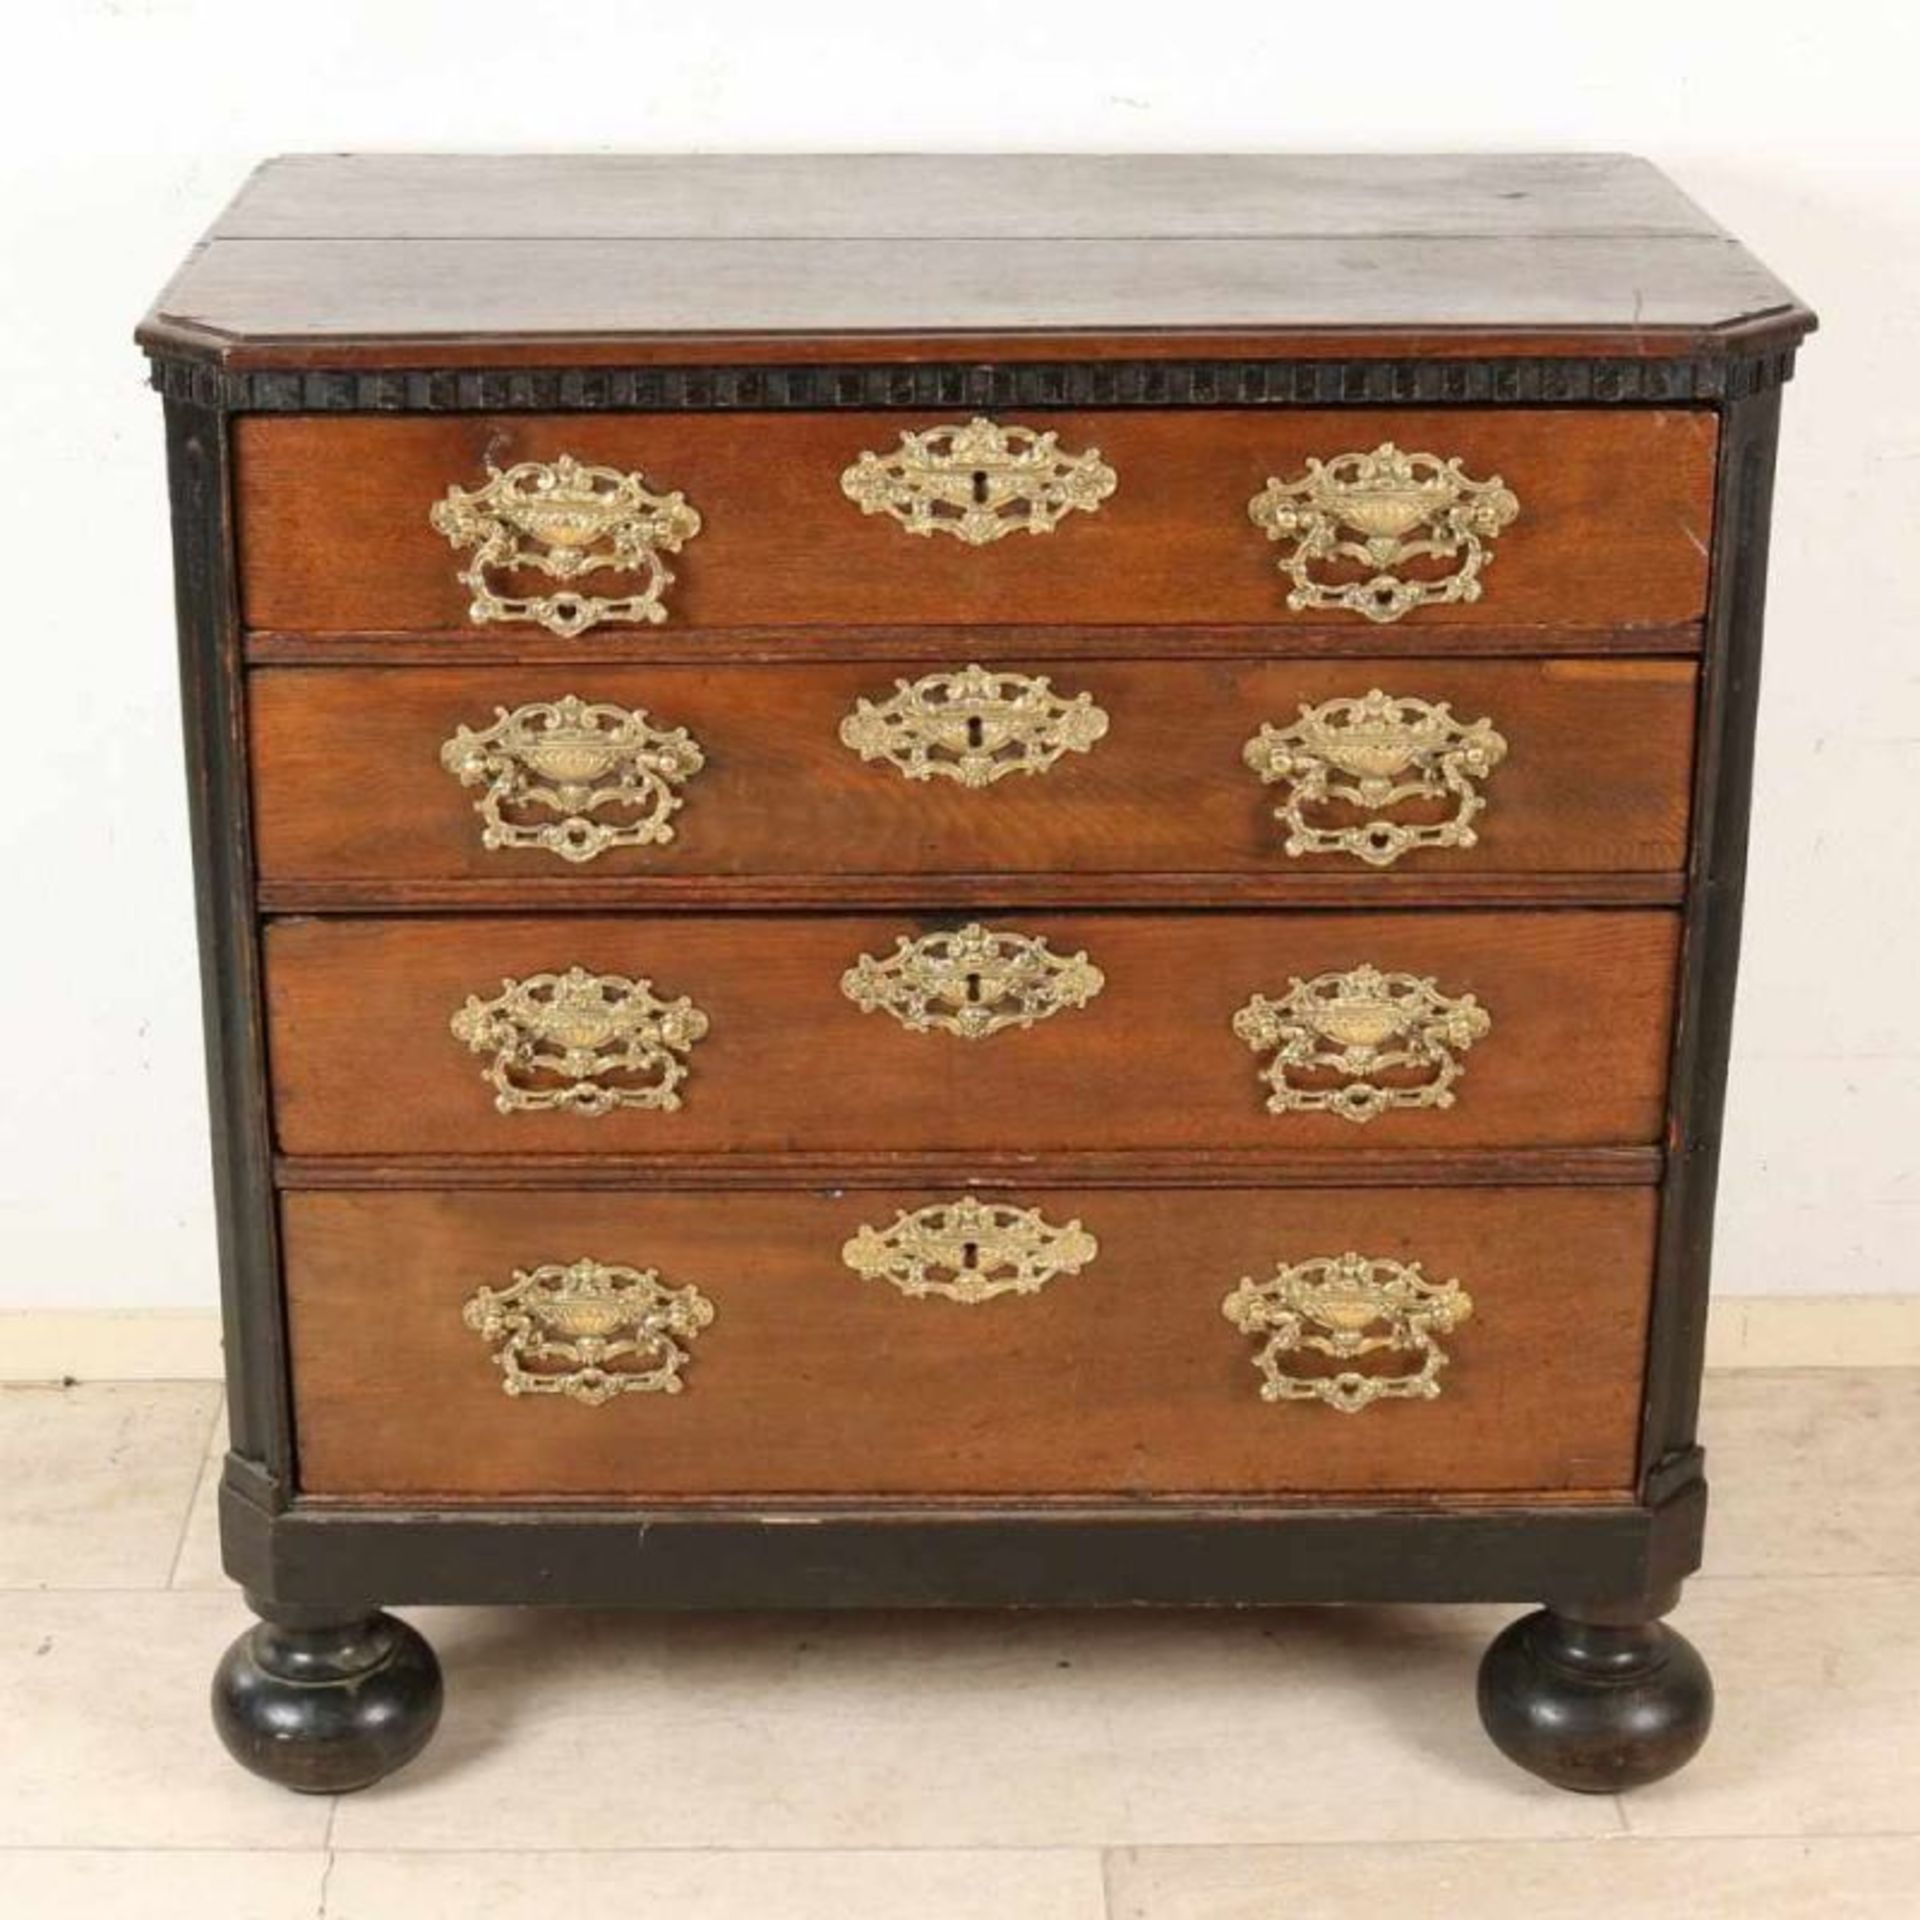 18th century oak four-drawer Baroque chest of drawers with beautiful bronze fittings. Dimensions: 95